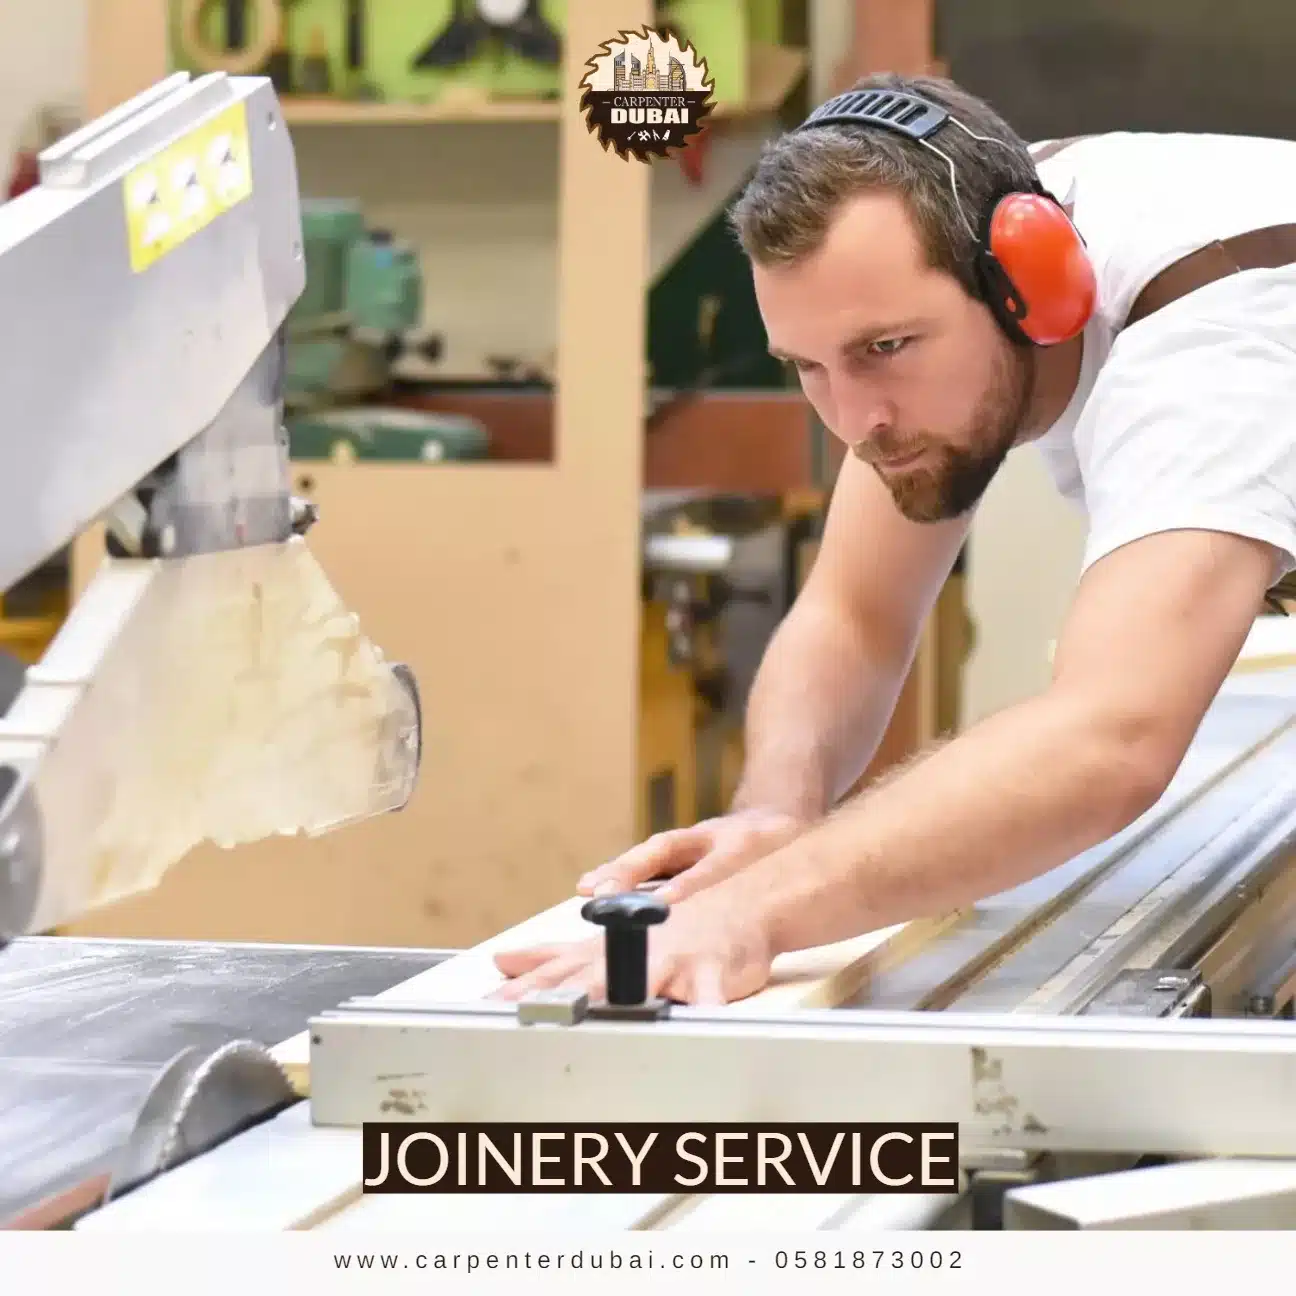 Joinery Service